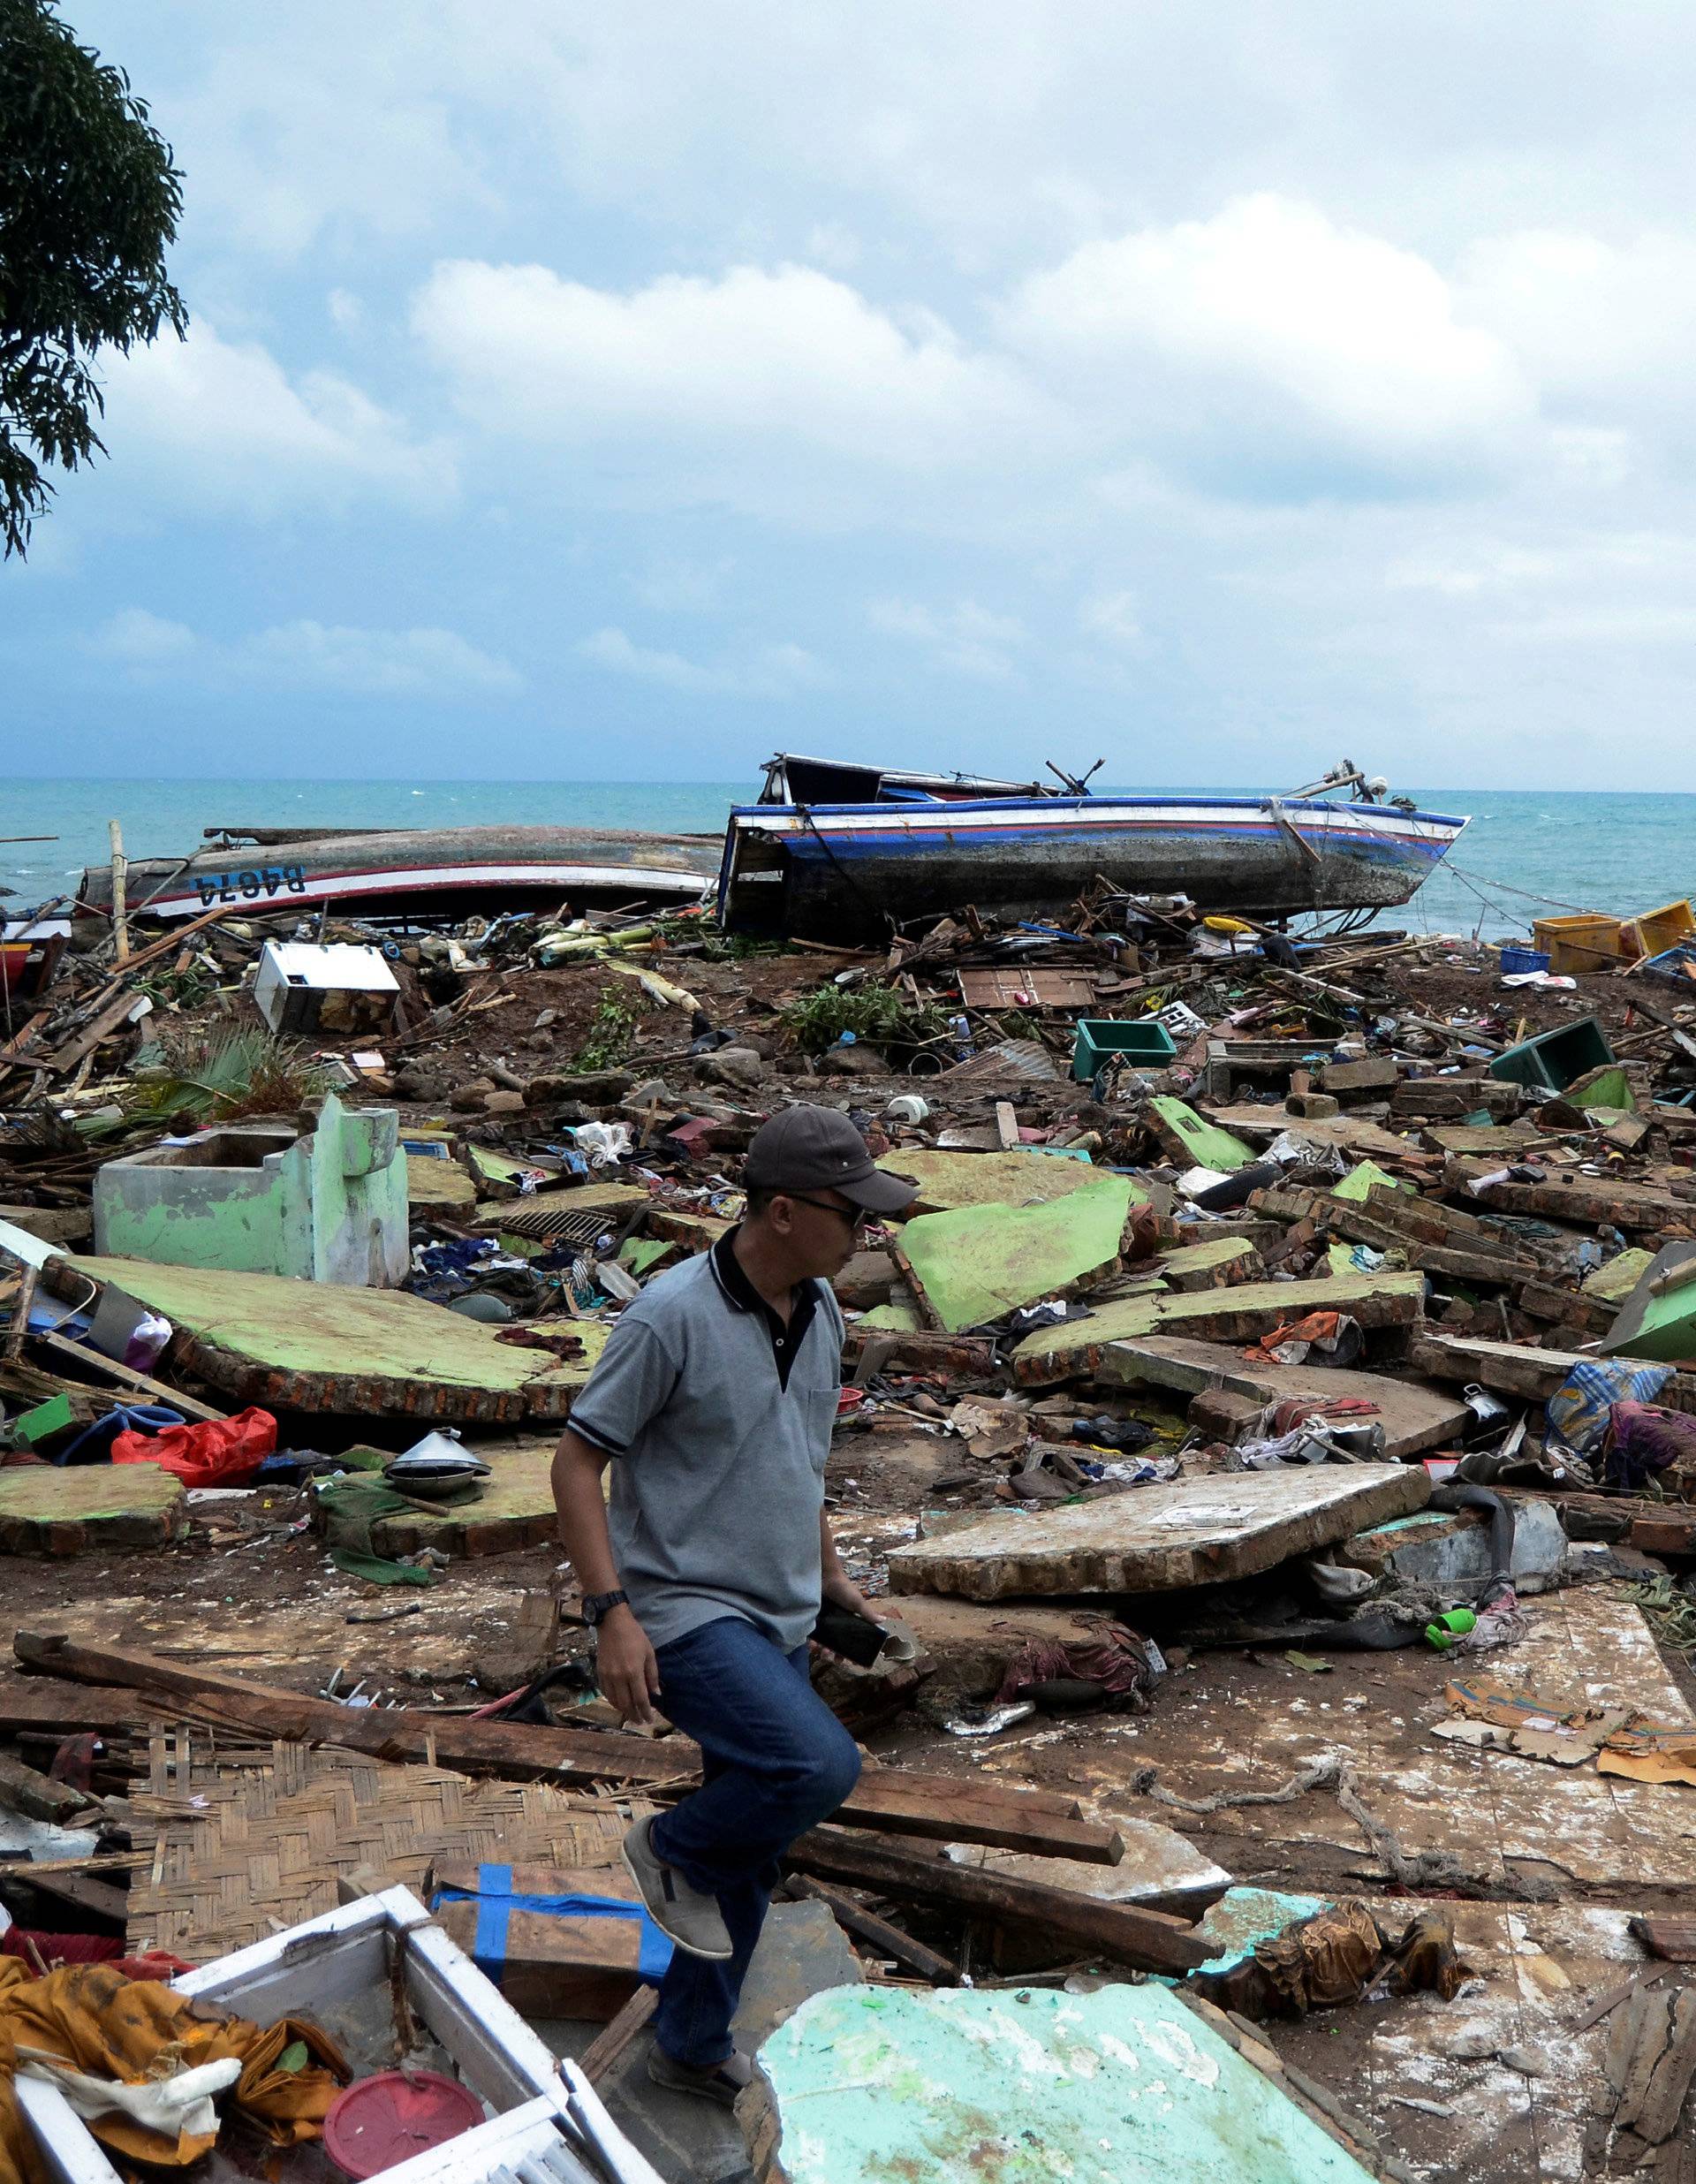 A local walks as he searches for his items among debris after a tsunami hit at Rajabasa district in South Lampung